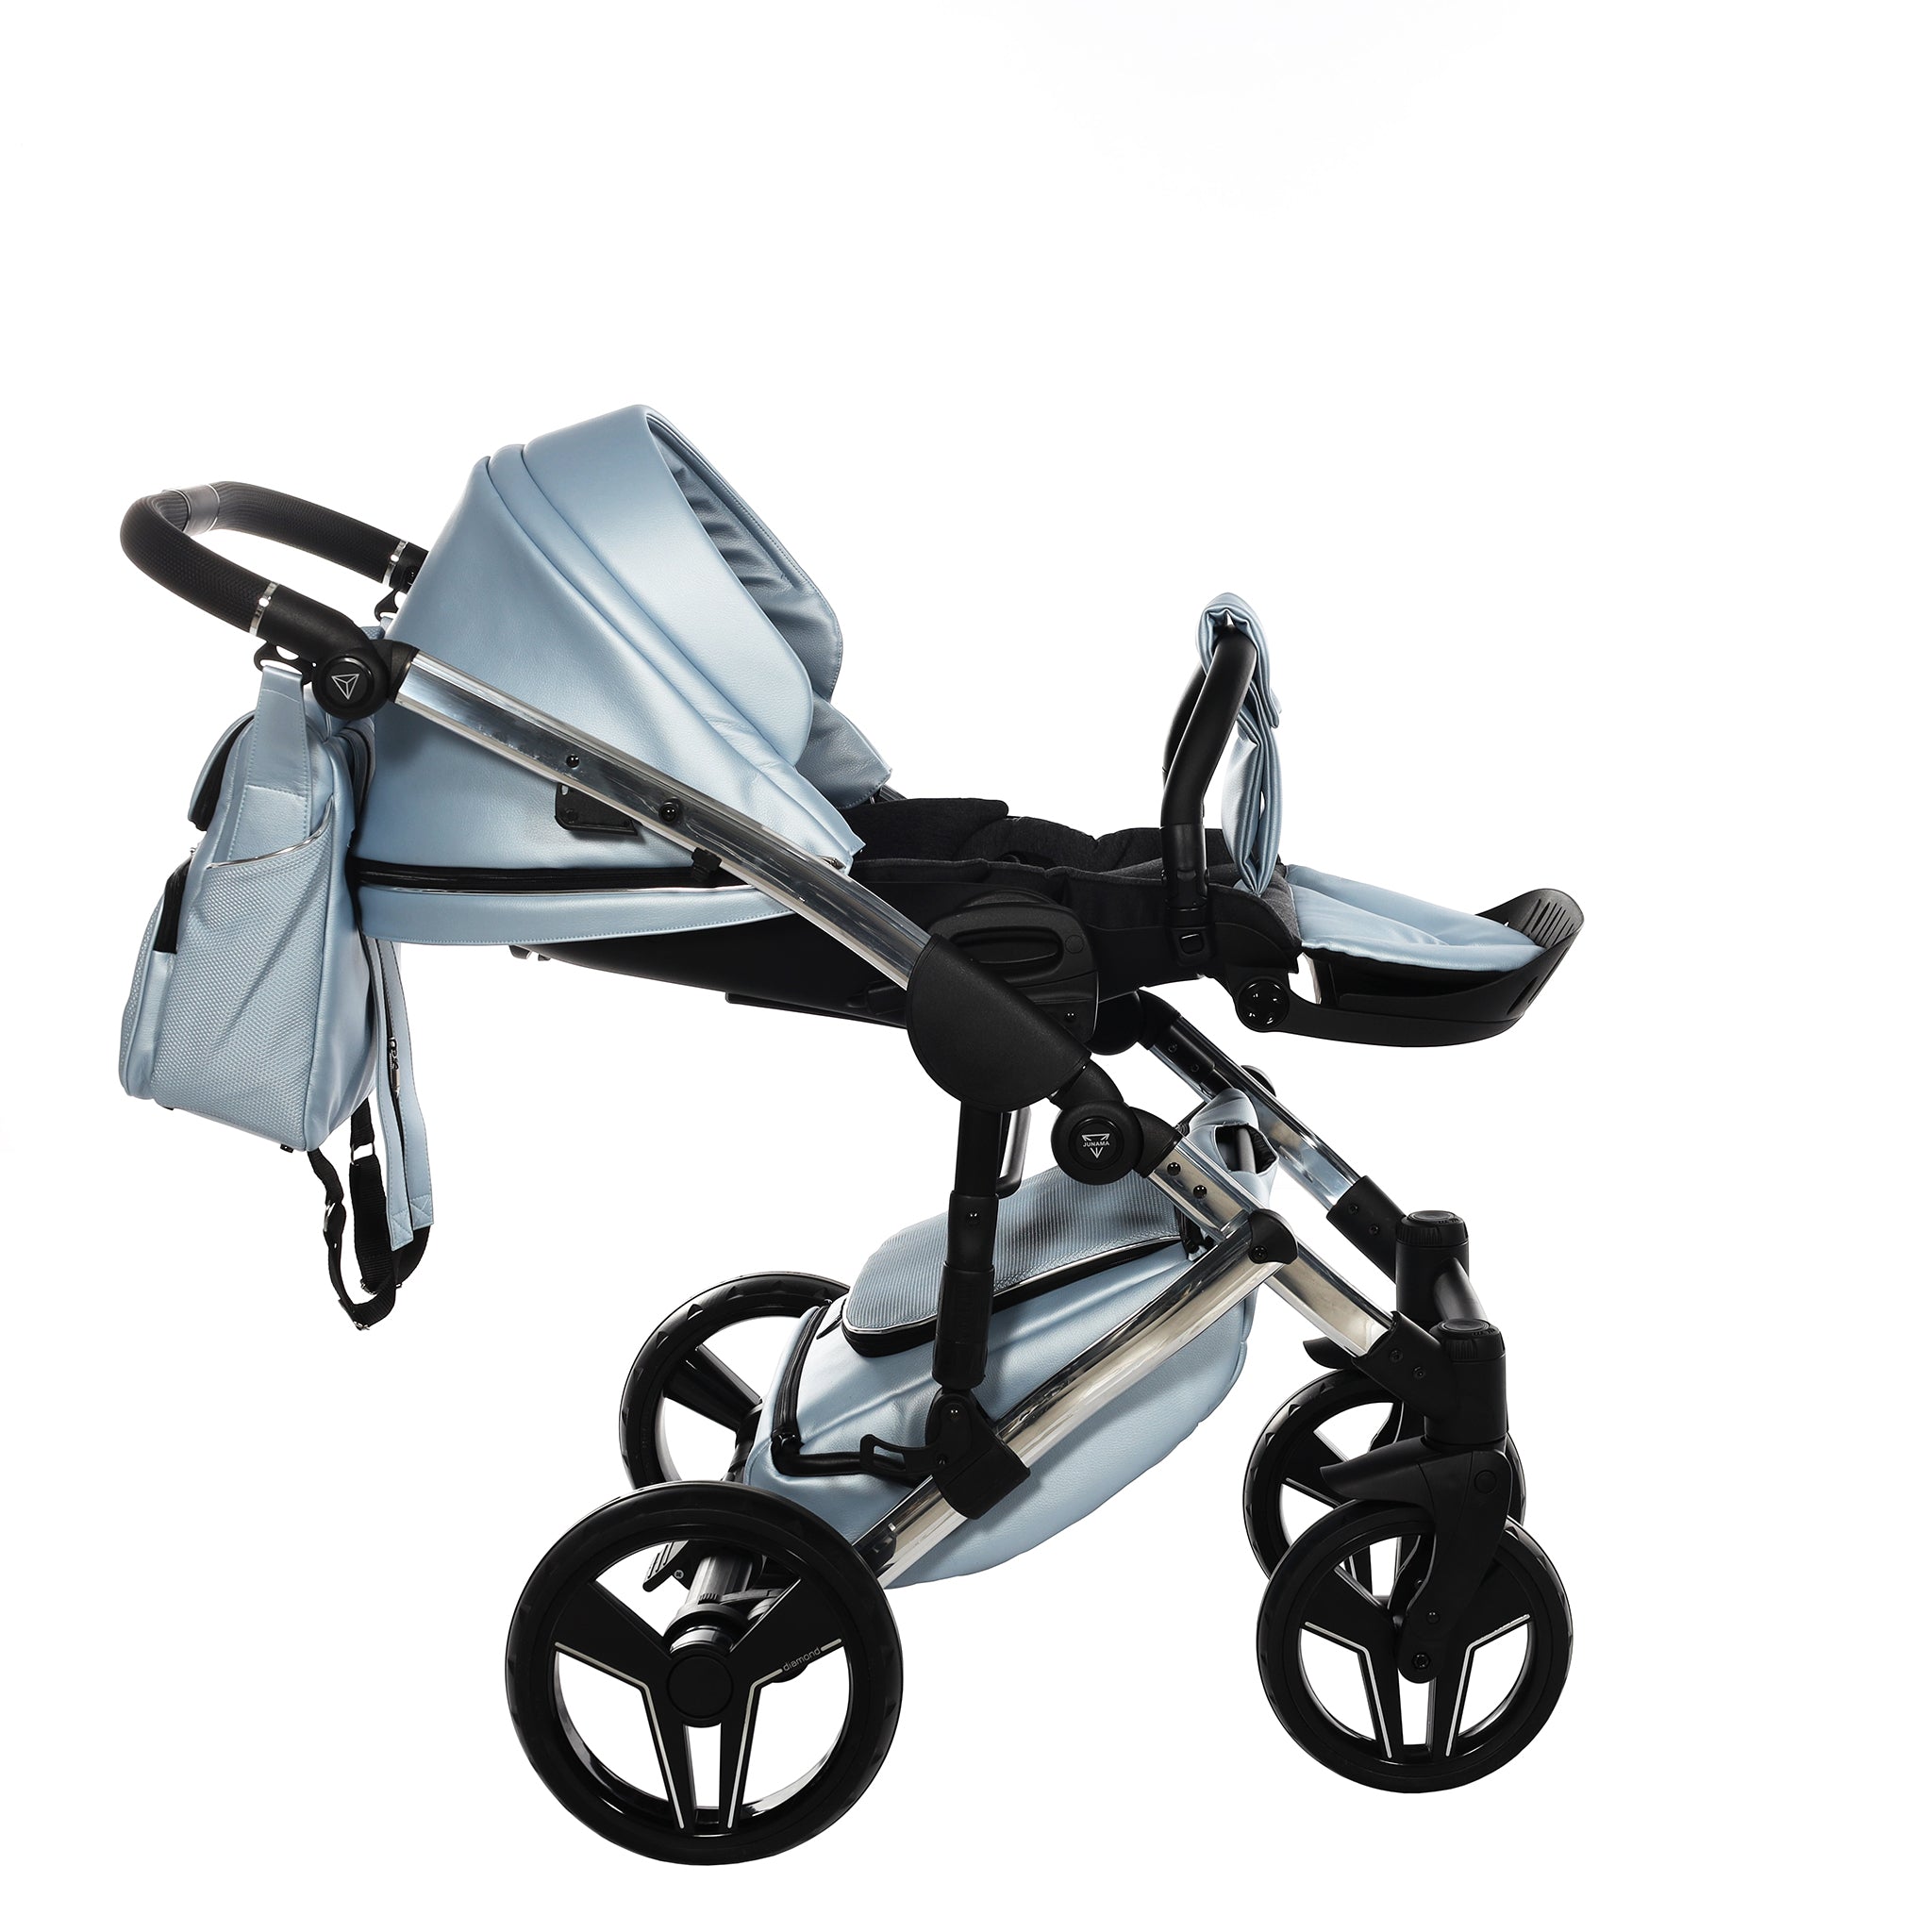 Junama S Class, baby prams or stroller 2 in 1 - Baby blue and Silver, Code number: JUNSC010